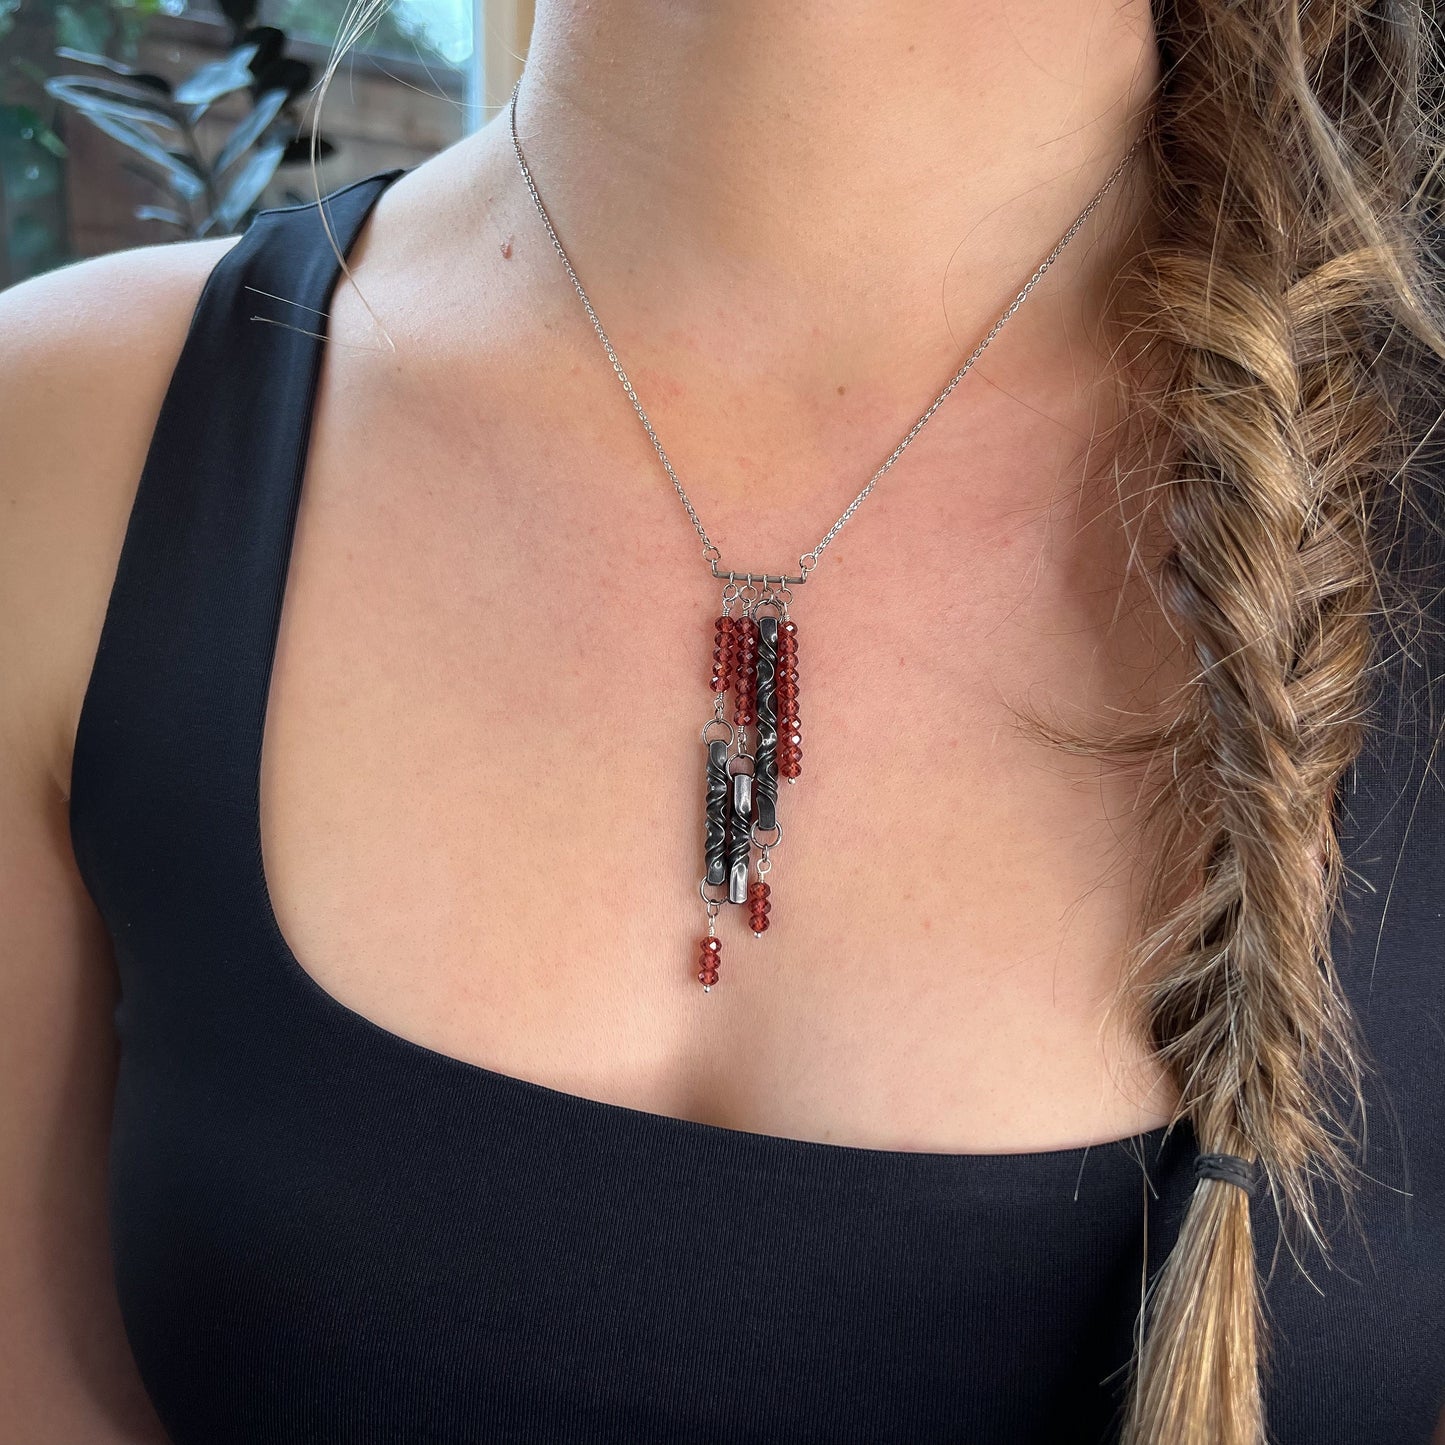 GARNET and iron  bar necklace, 6th anniversary gift for wife, January birthstone jewelry, statement necklace by blacksmith, hand forged